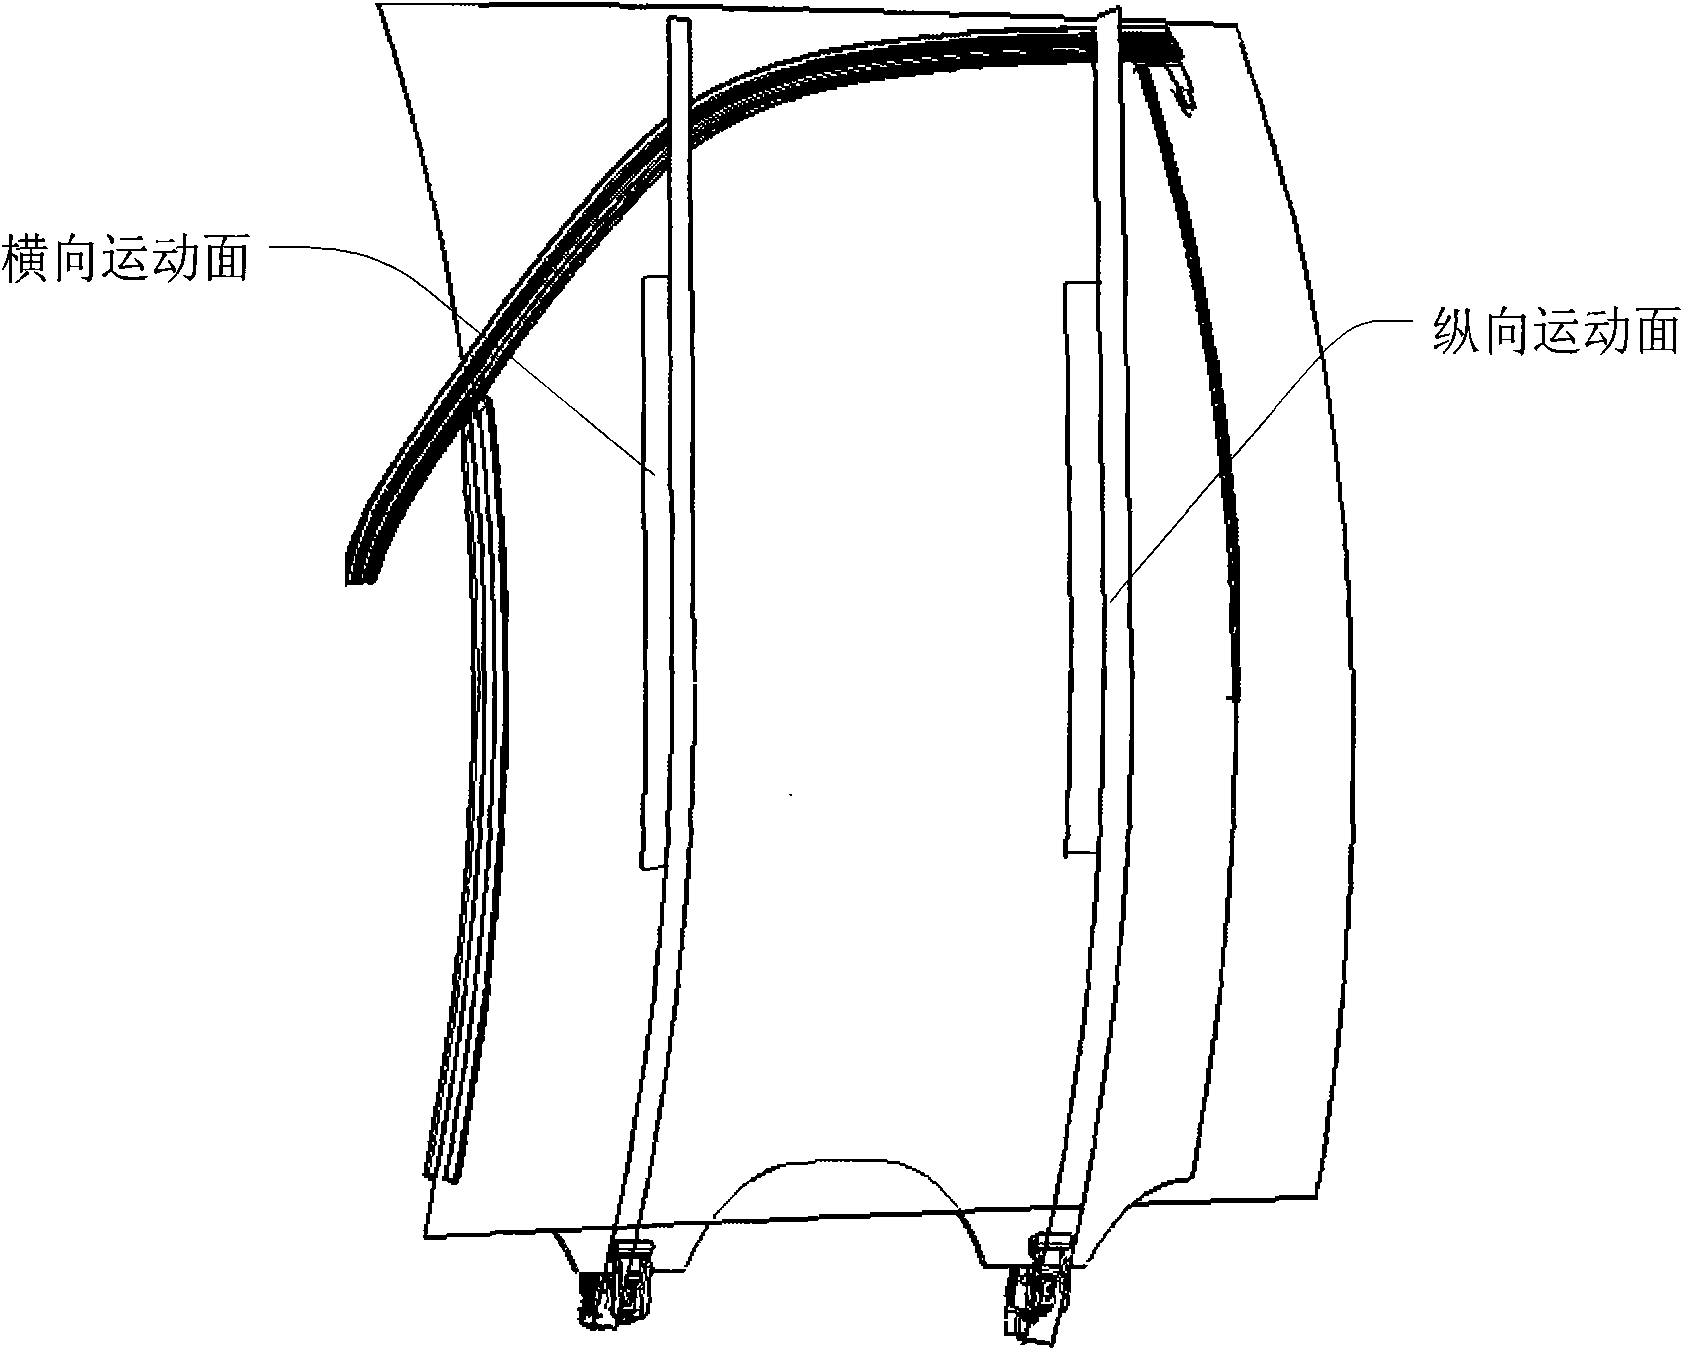 Confirmation method of working curved surface of window lifter guide rail of vehicle door